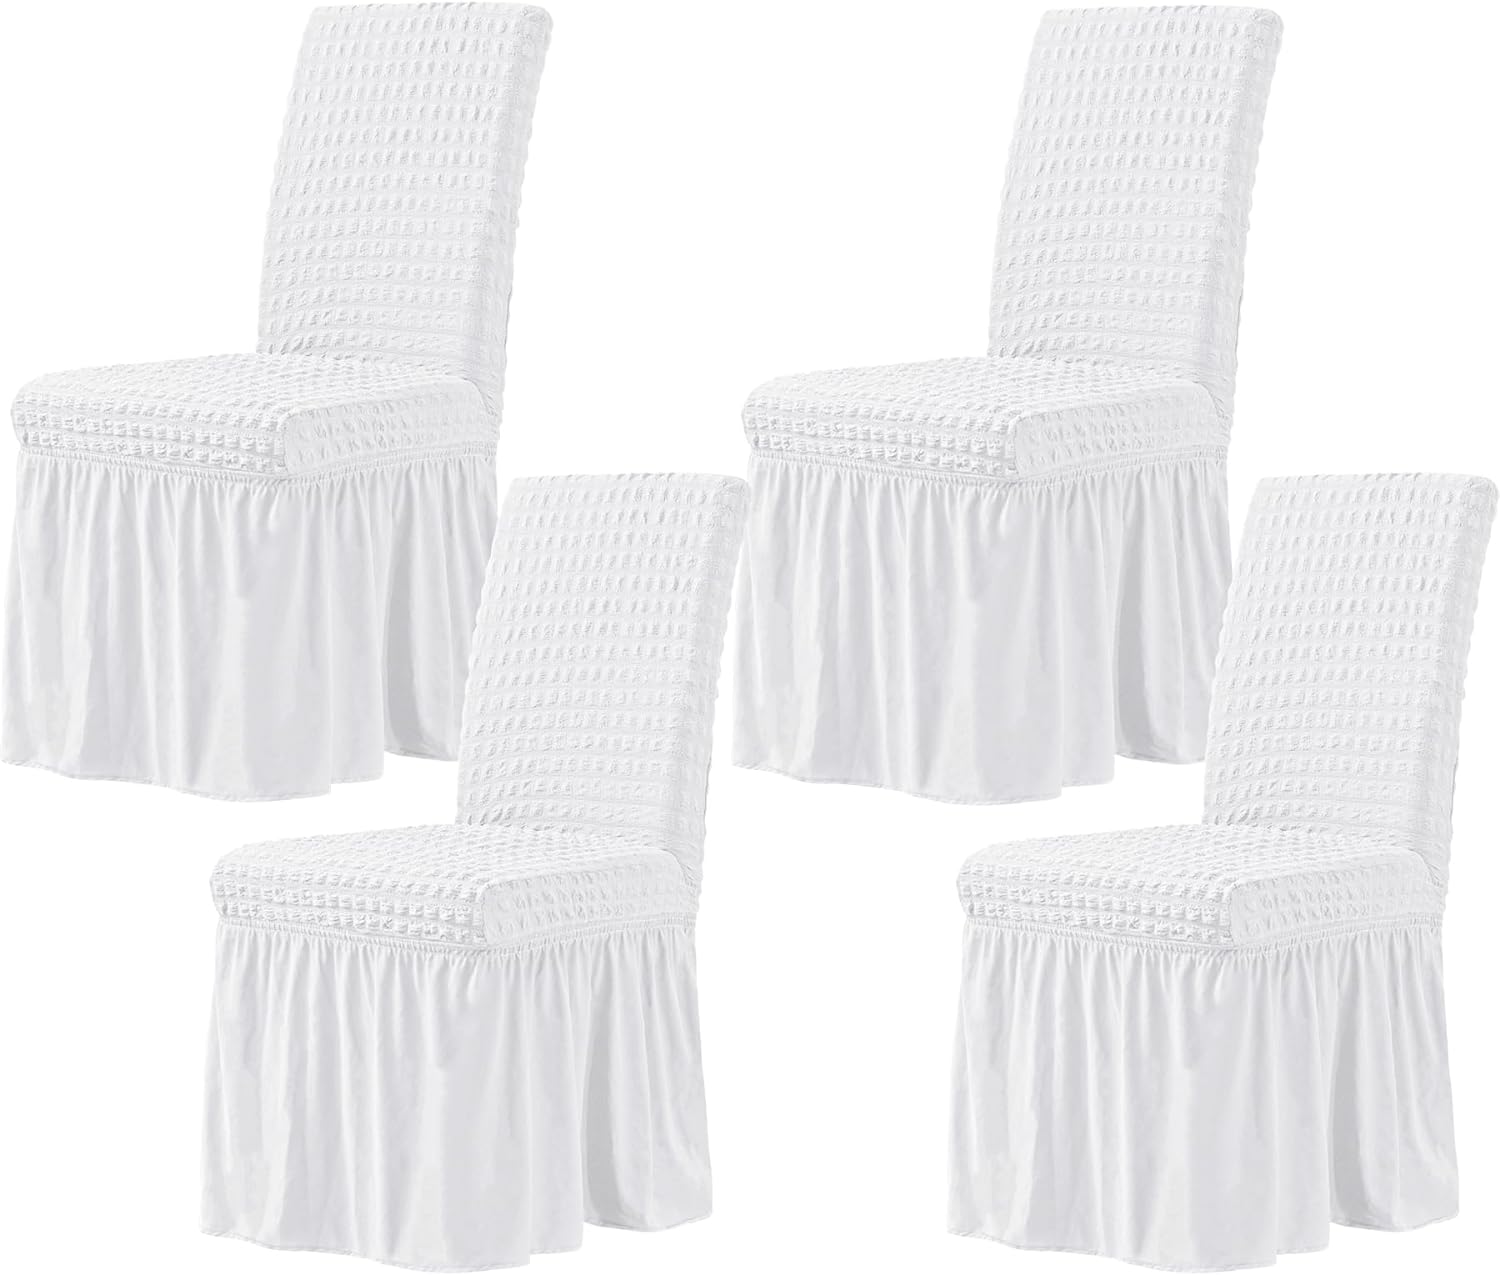 CHUN YI White Chair Covers for Dining Room Set of 4, Universal Stretch Dining Room Chair Covers with Skirt, Removable Parsons Chair Slipcover for Kitchen Wedding Party Banquet